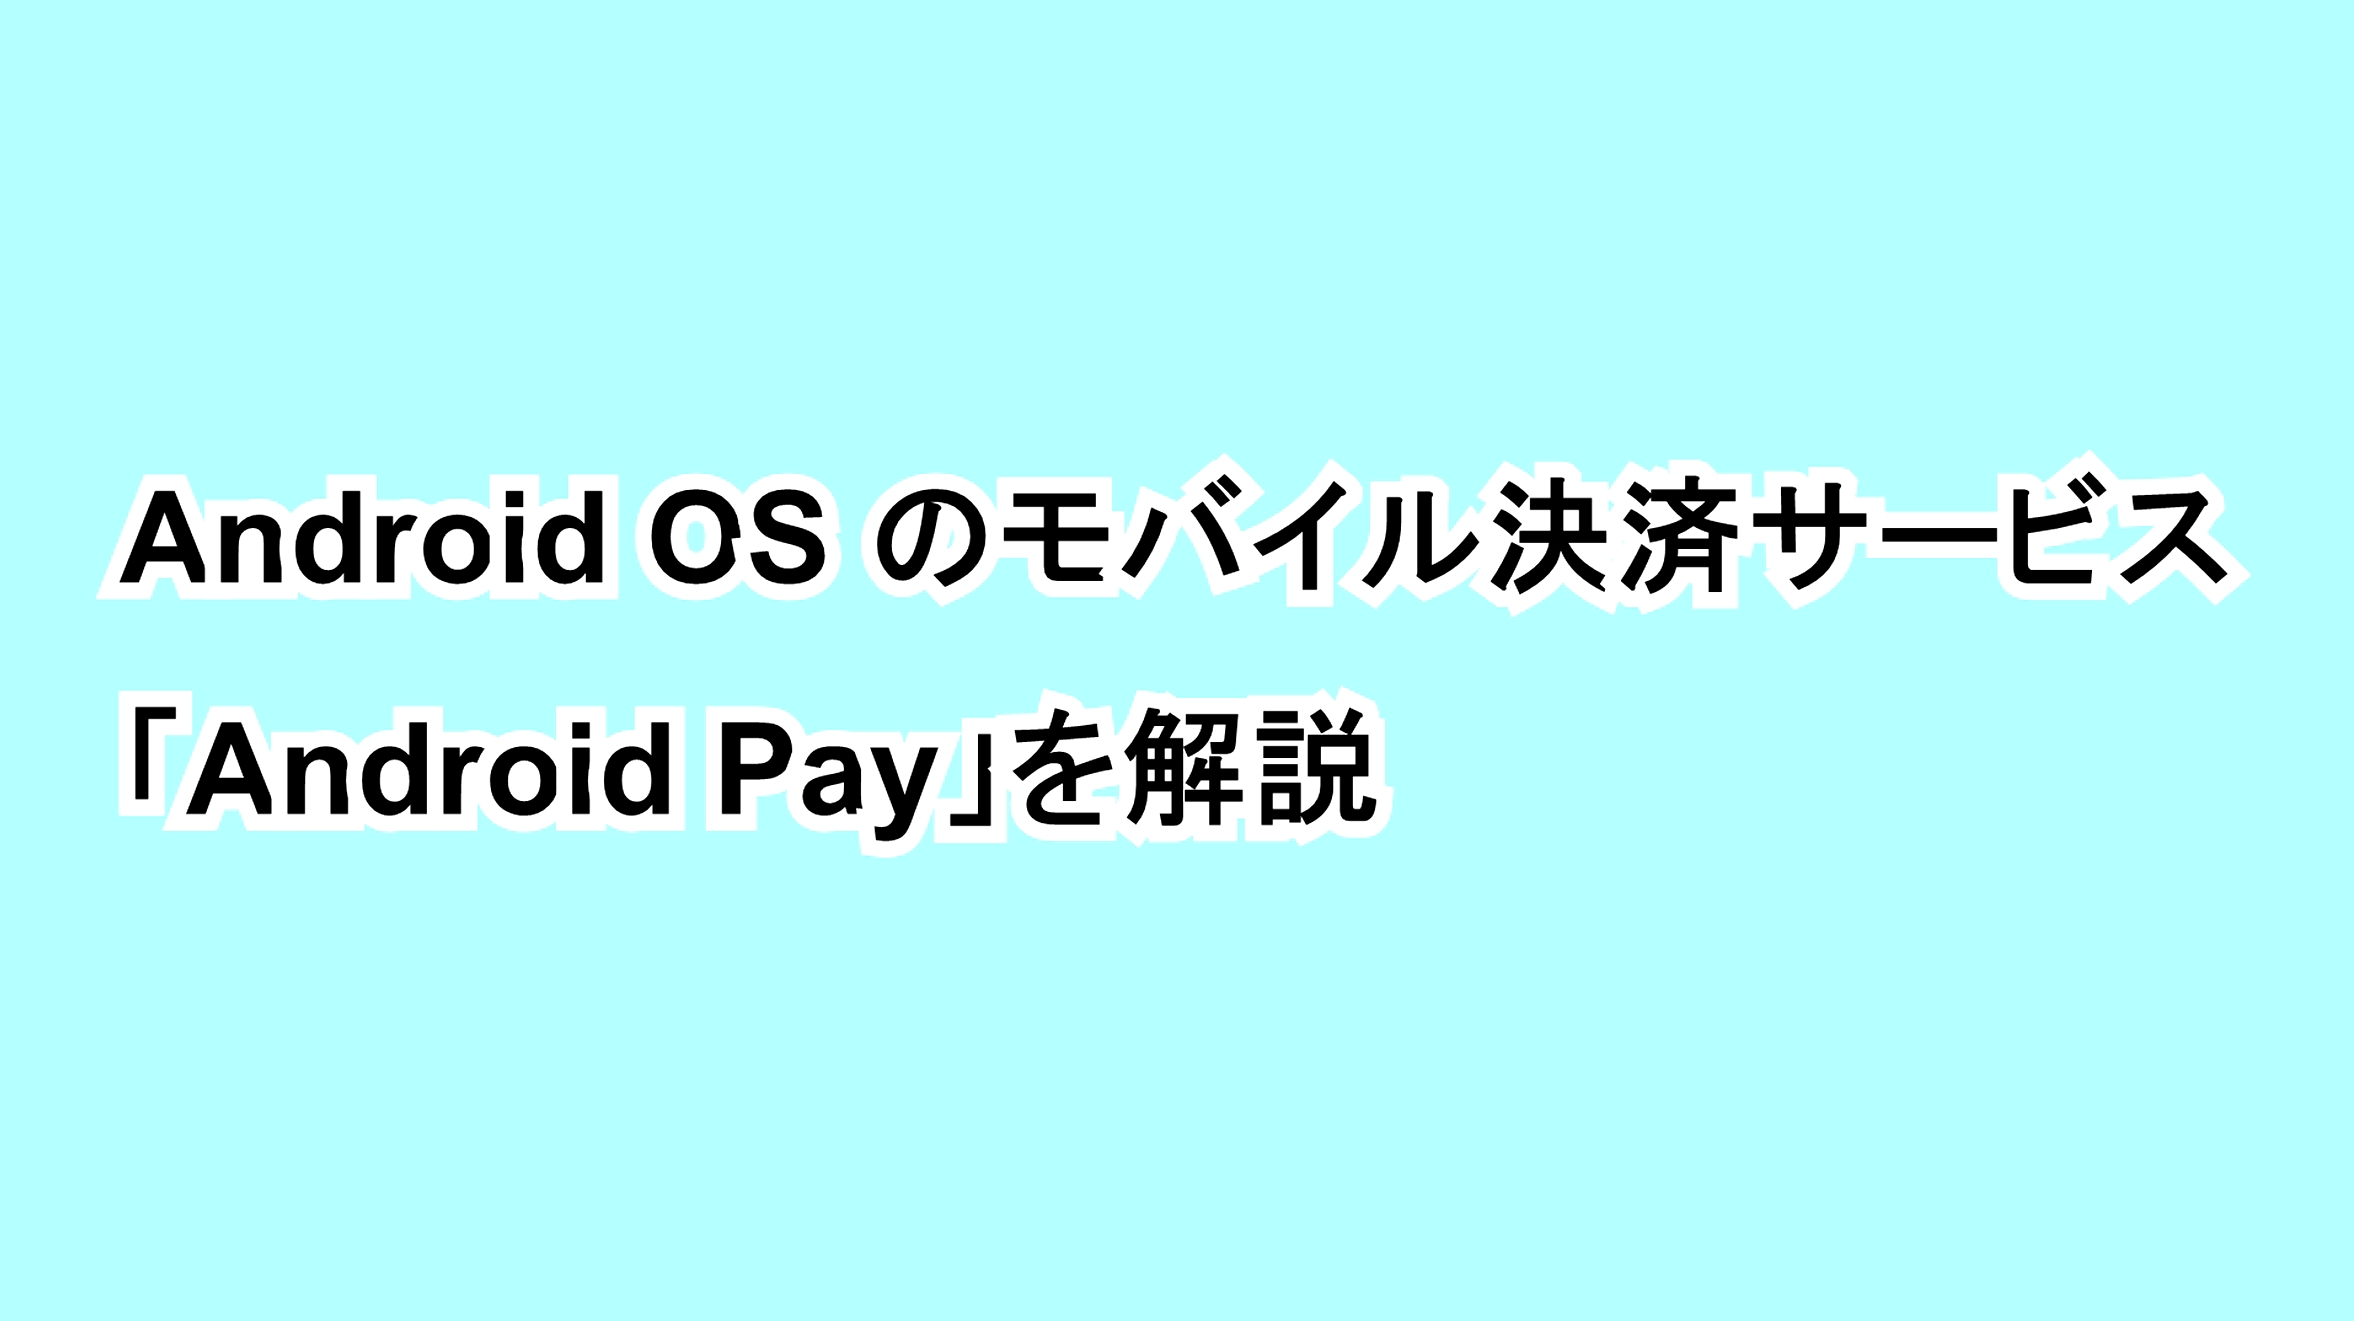 Android OSのモバイル決済サービス「Android Pay」を解説